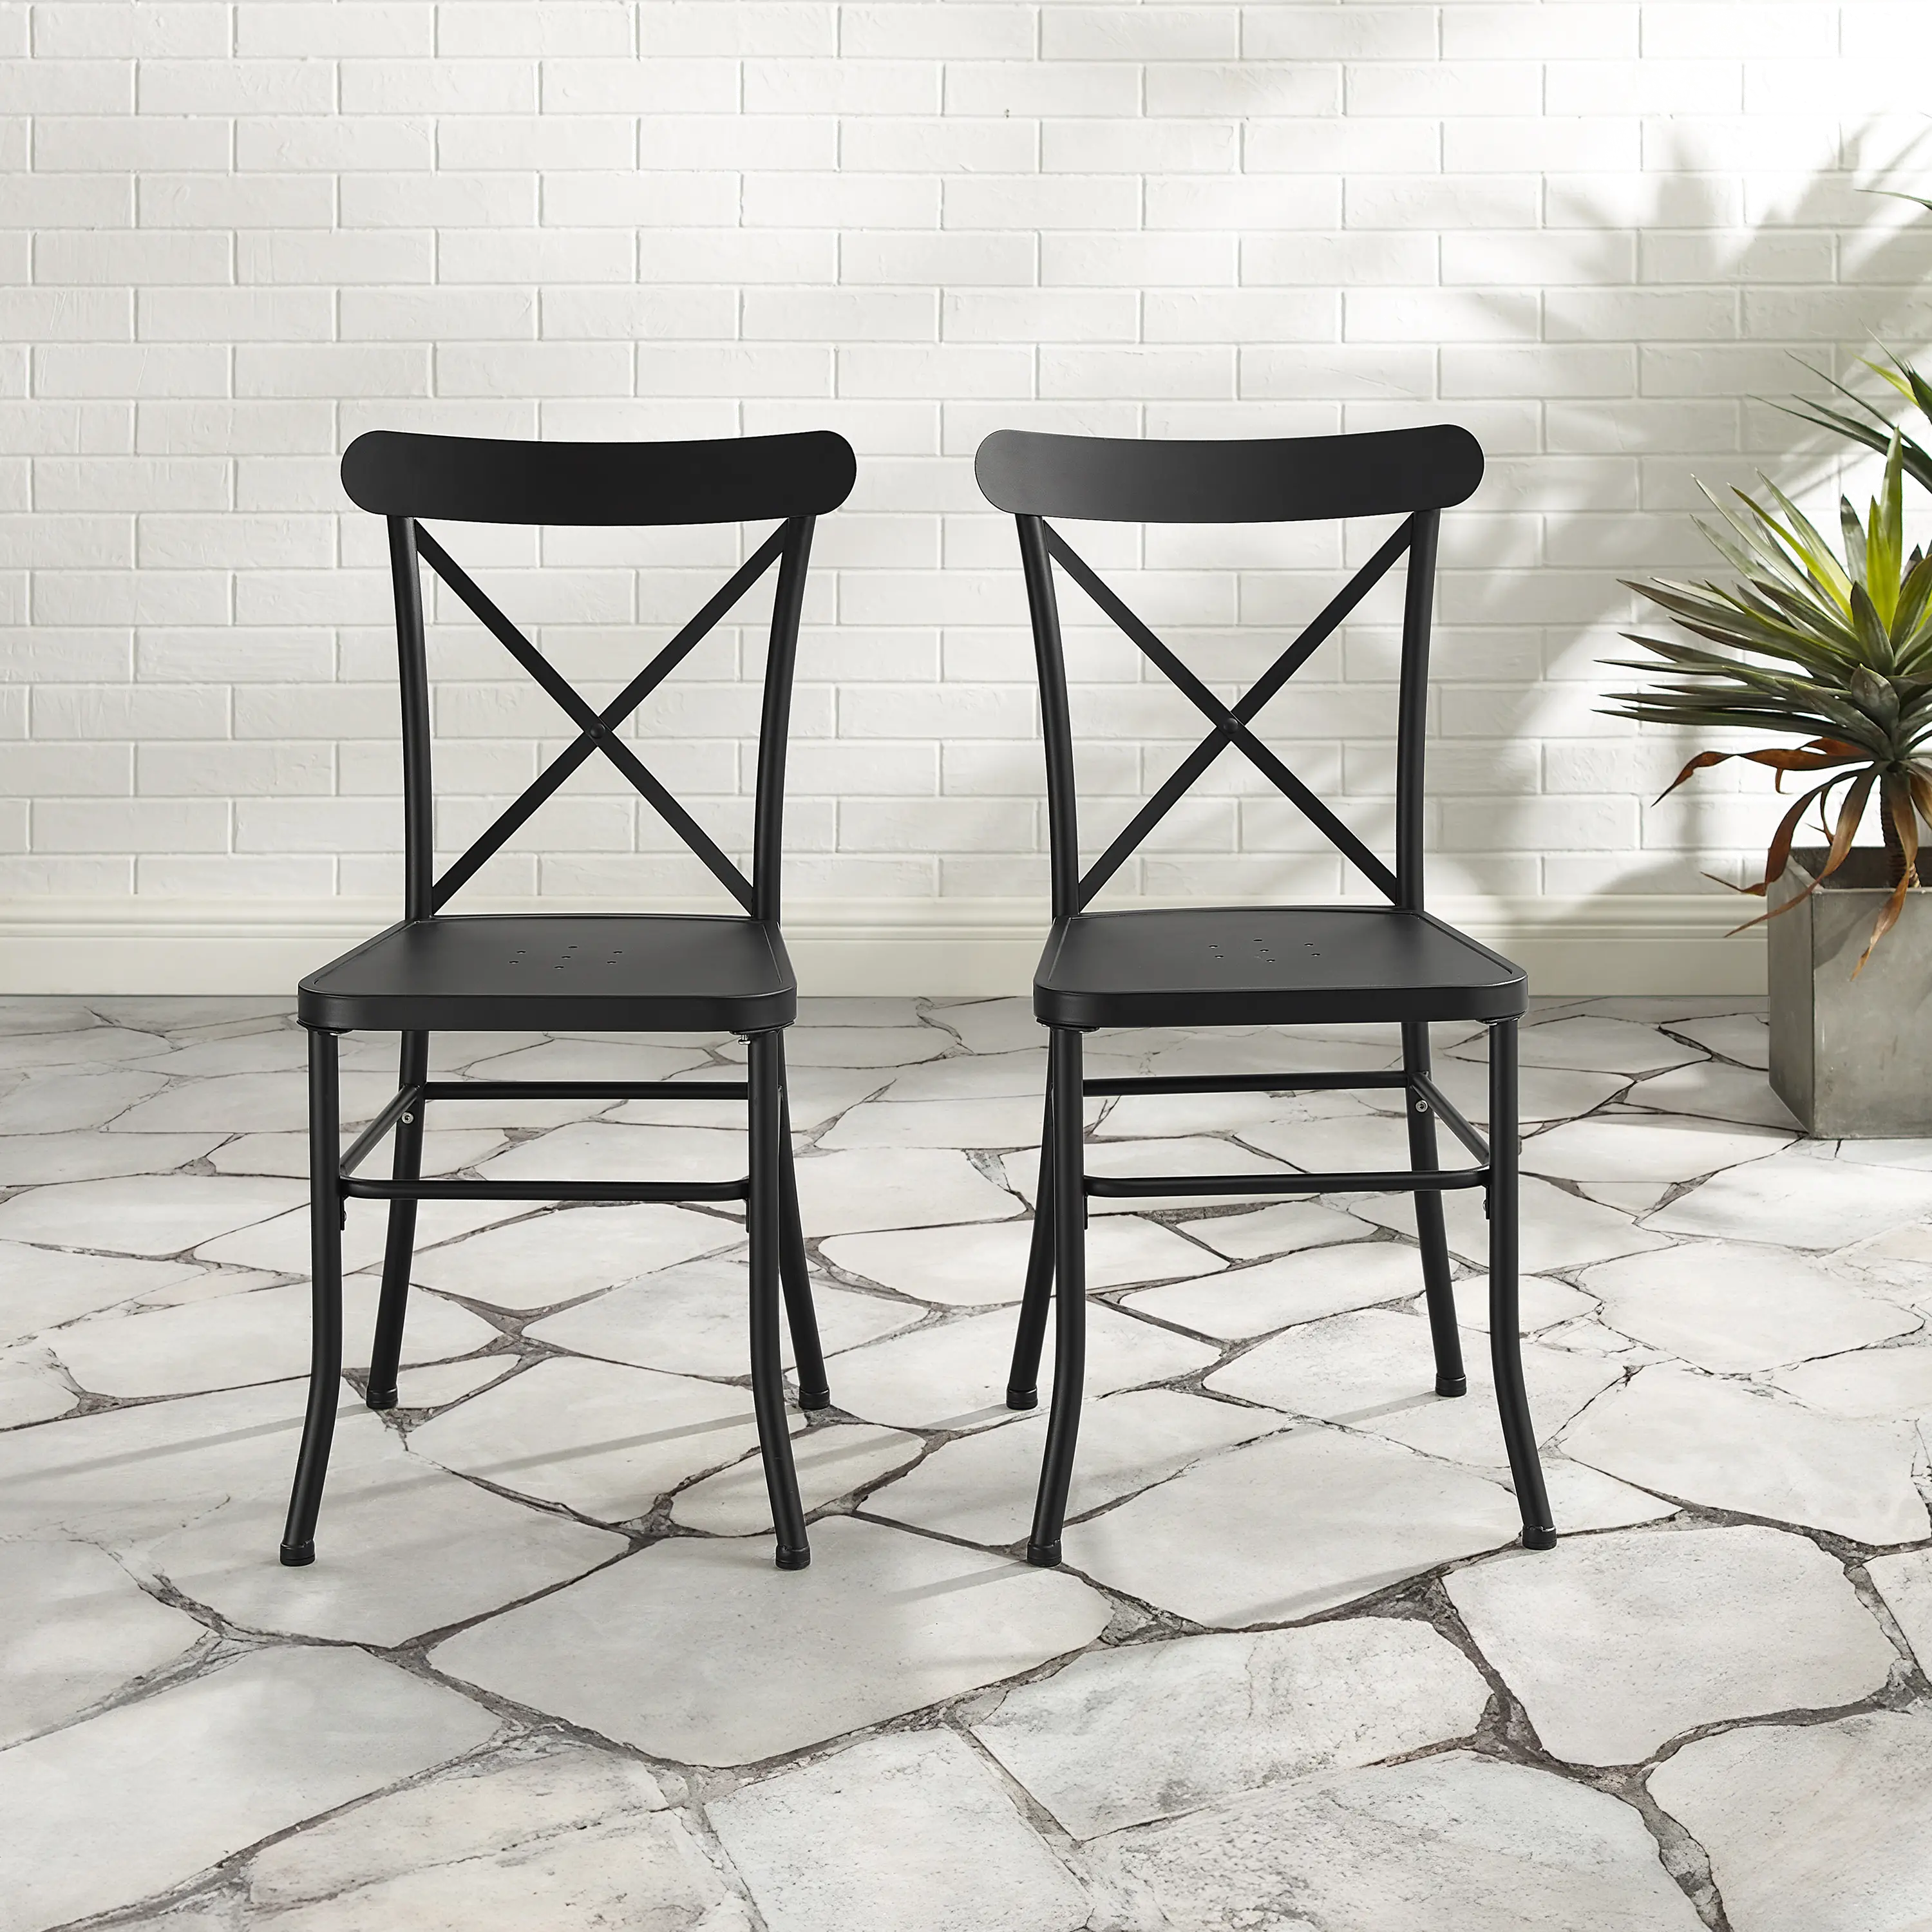 CO6270-MB Astrid Black Metal Patio Dining Chairs, Set of 2 sku CO6270-MB